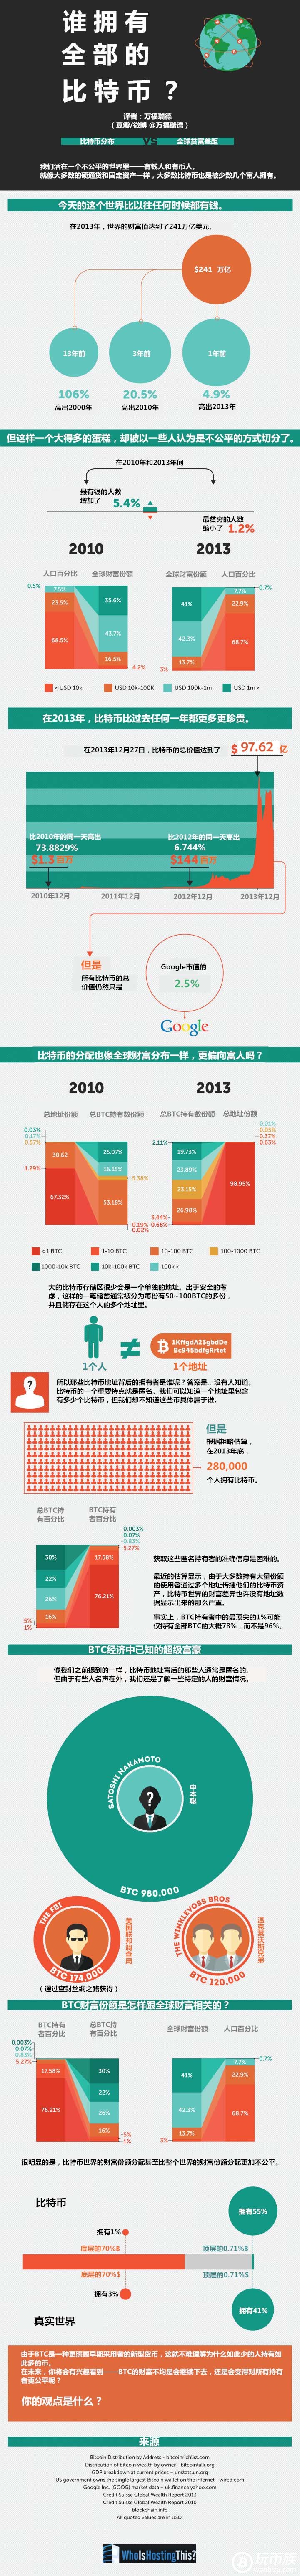 Who-owns-all-the-bitcoins_in chinese